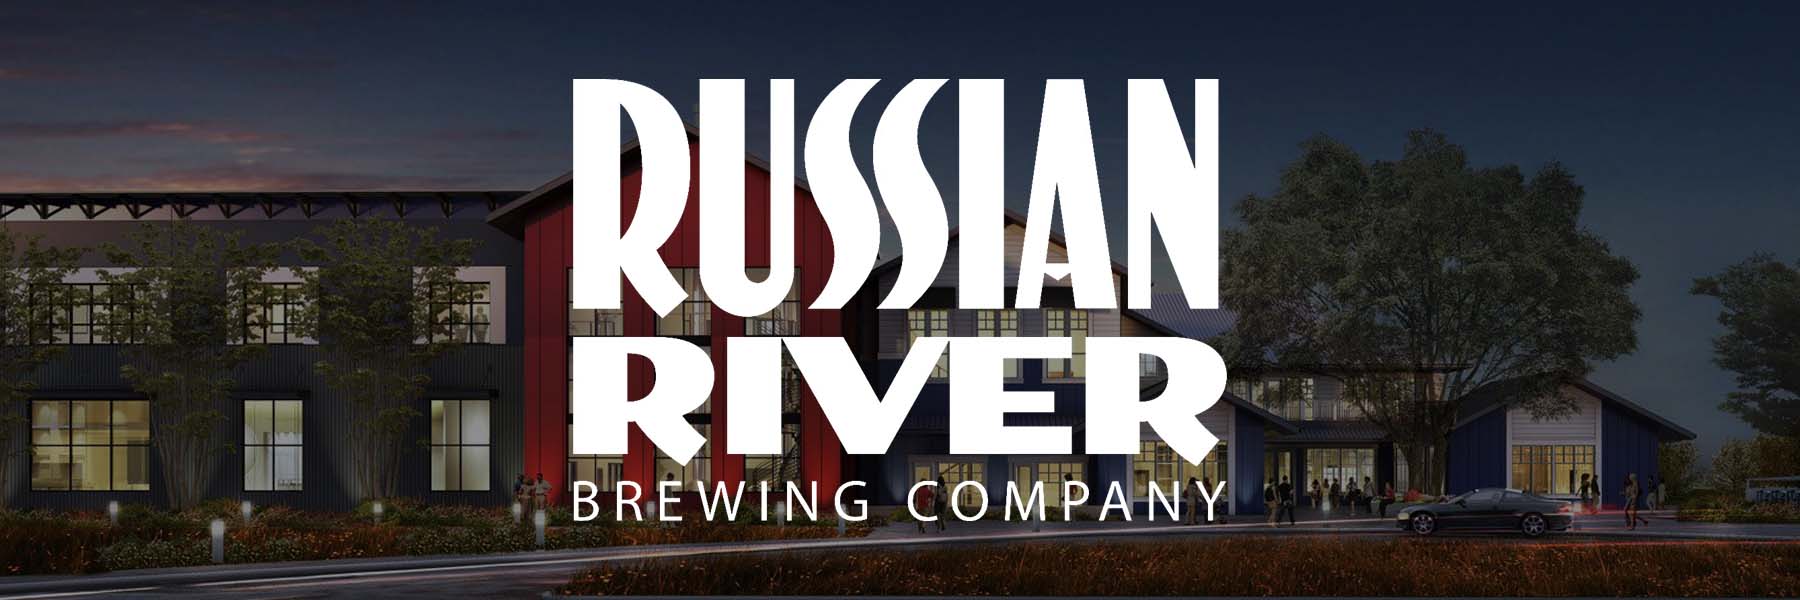 Russian River | 5 bbl Pilot Brewhouse